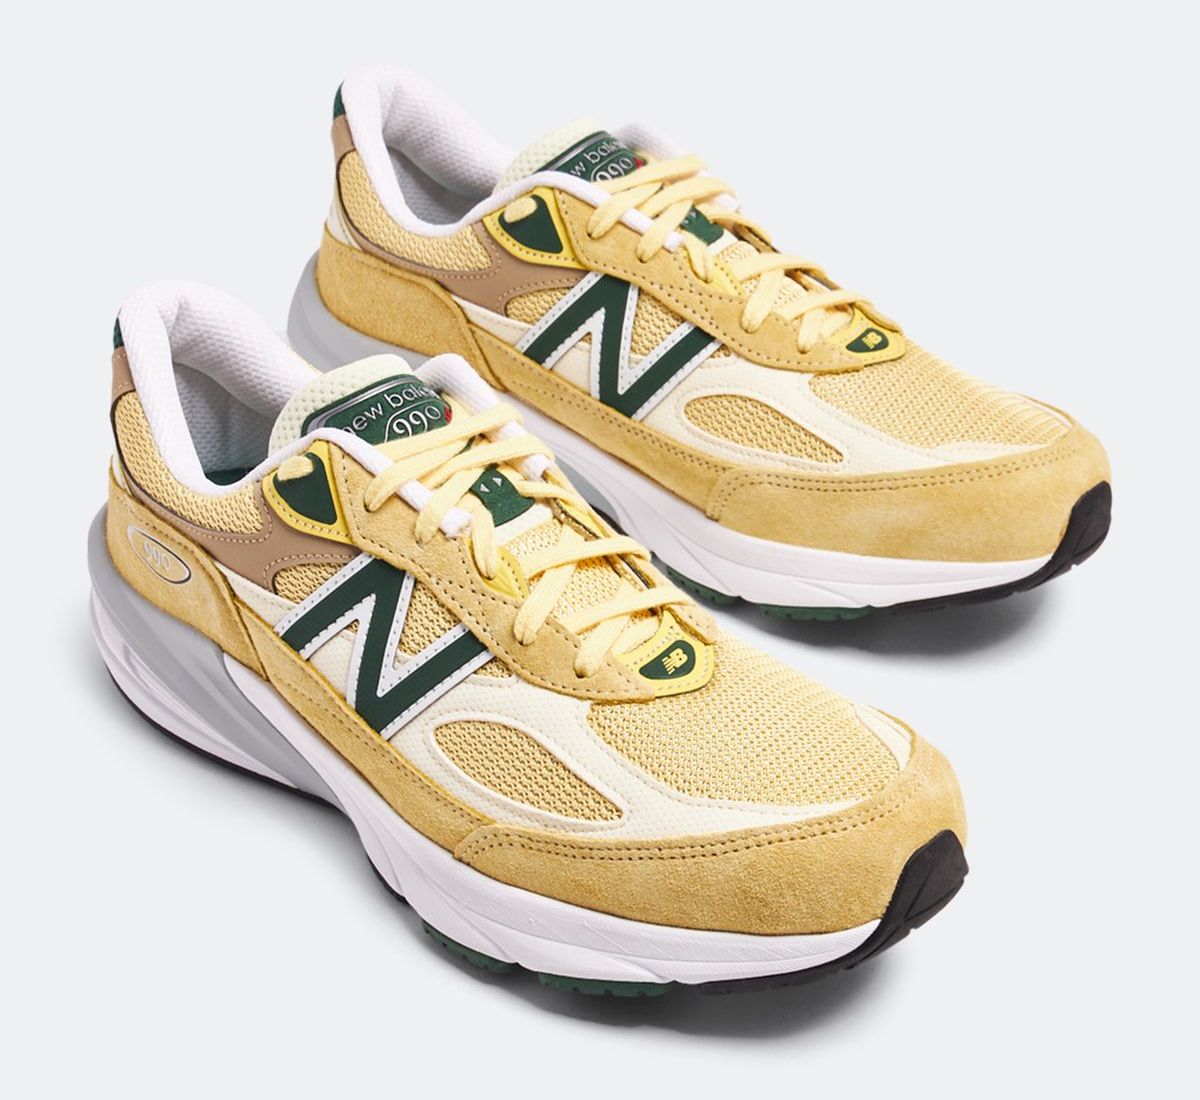 New Balance 990v6 Made in USA Pale Yellow U990TE6 with Forest Green accents